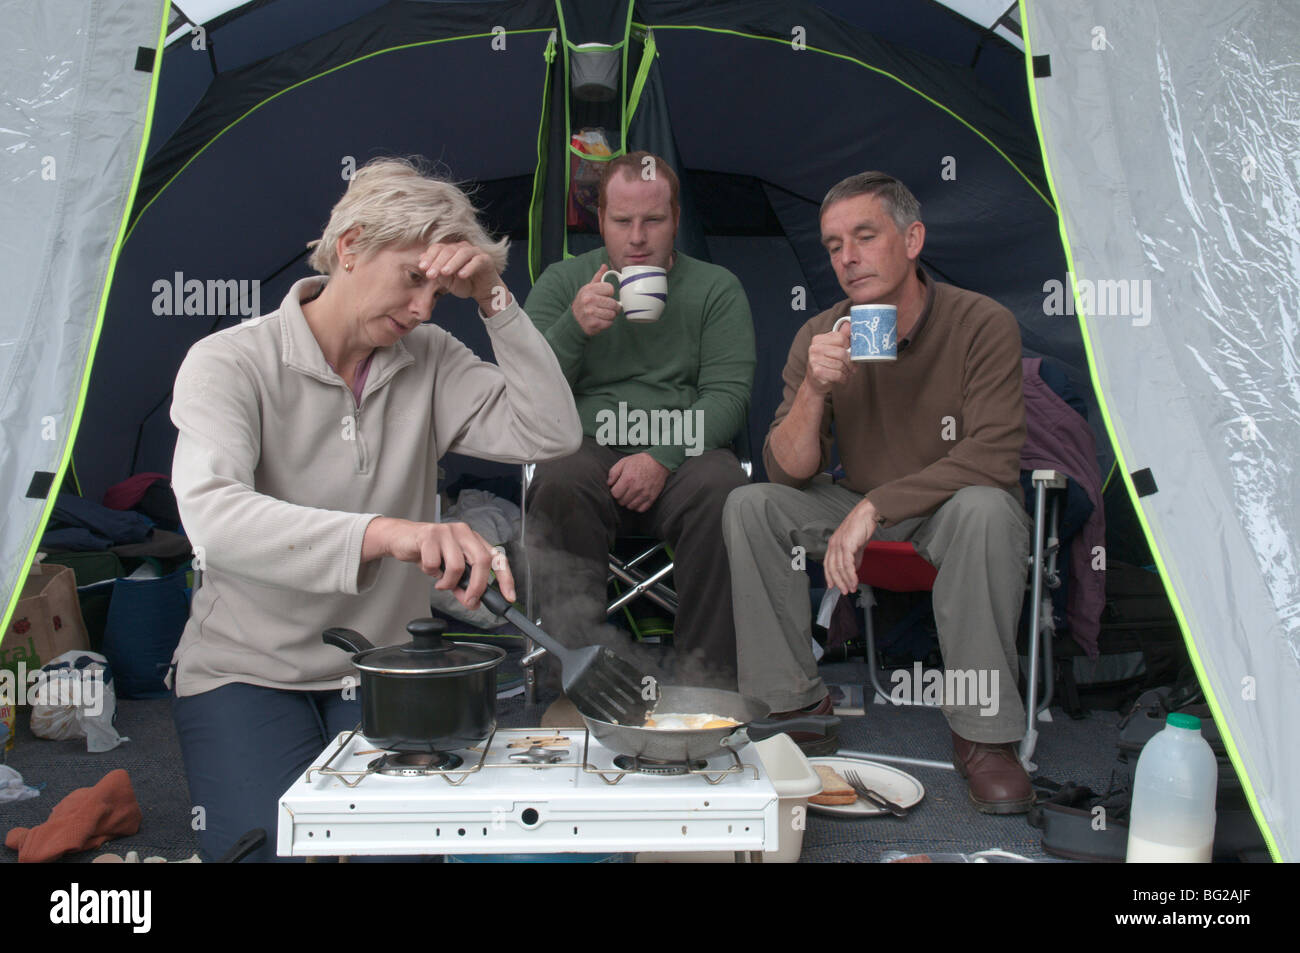 woman in tent cooking for two men as they just watch, Lazy men. Stock Photo